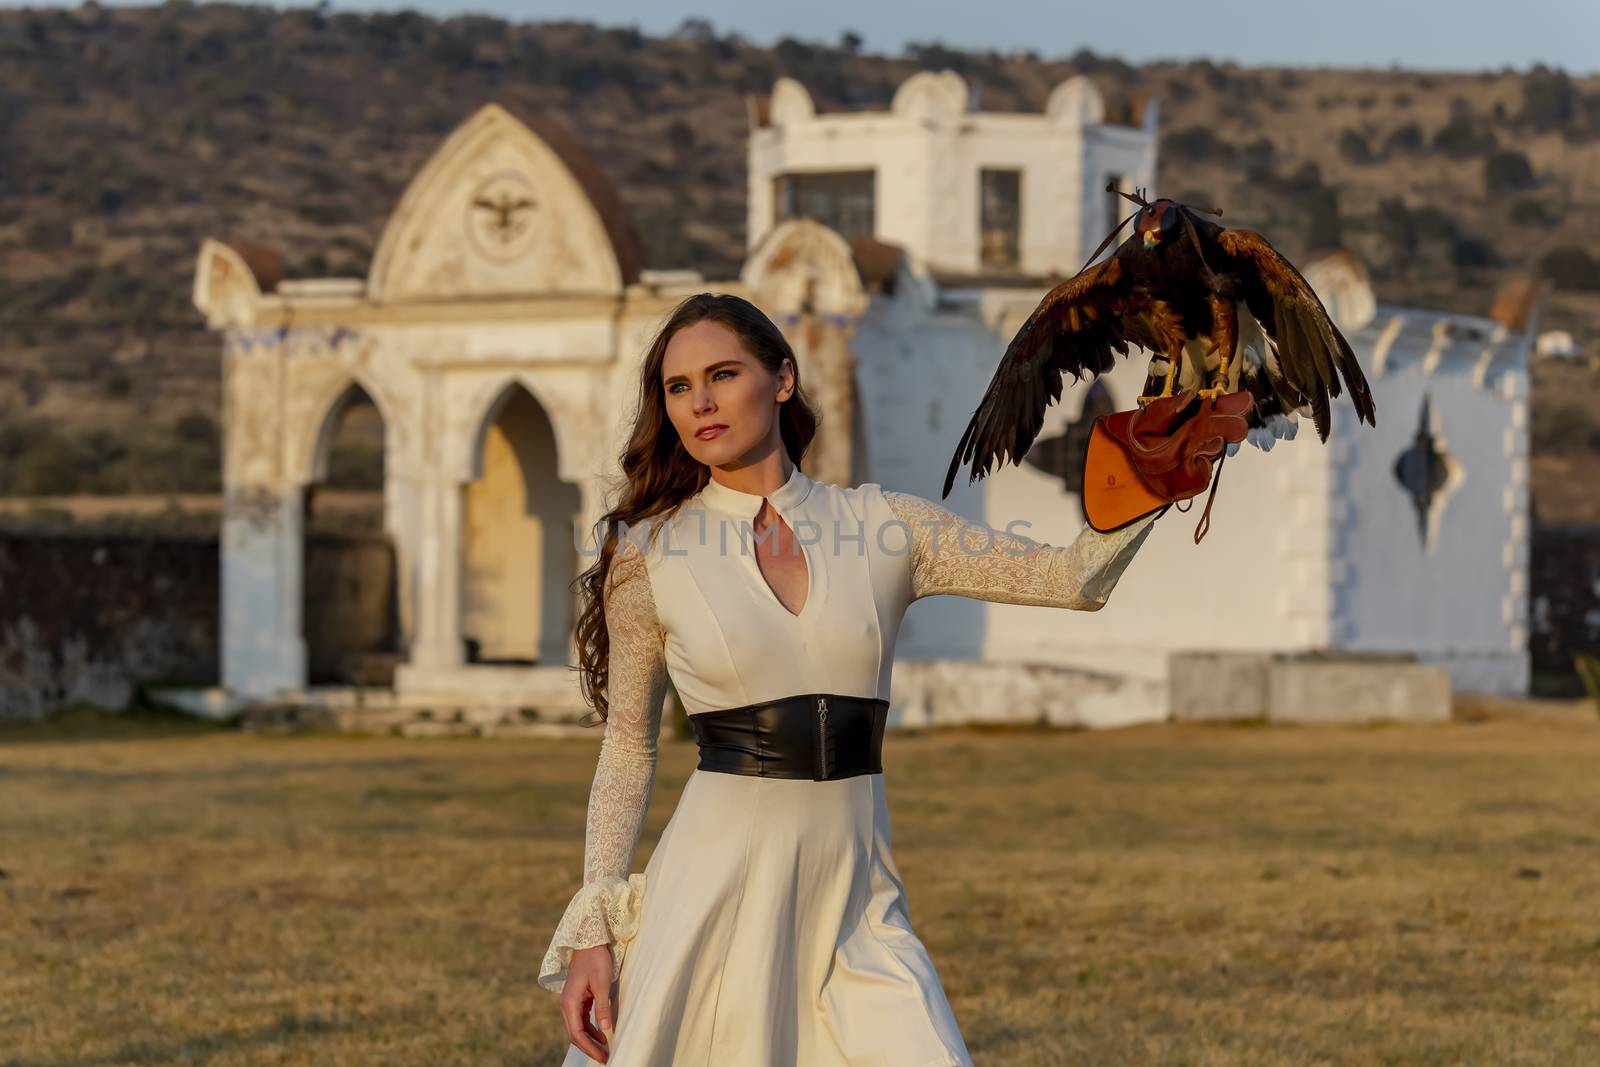 A Lovely Hispanic Brunette Model Poses Outdoors With A Falcon At A Hacienda by actionsports